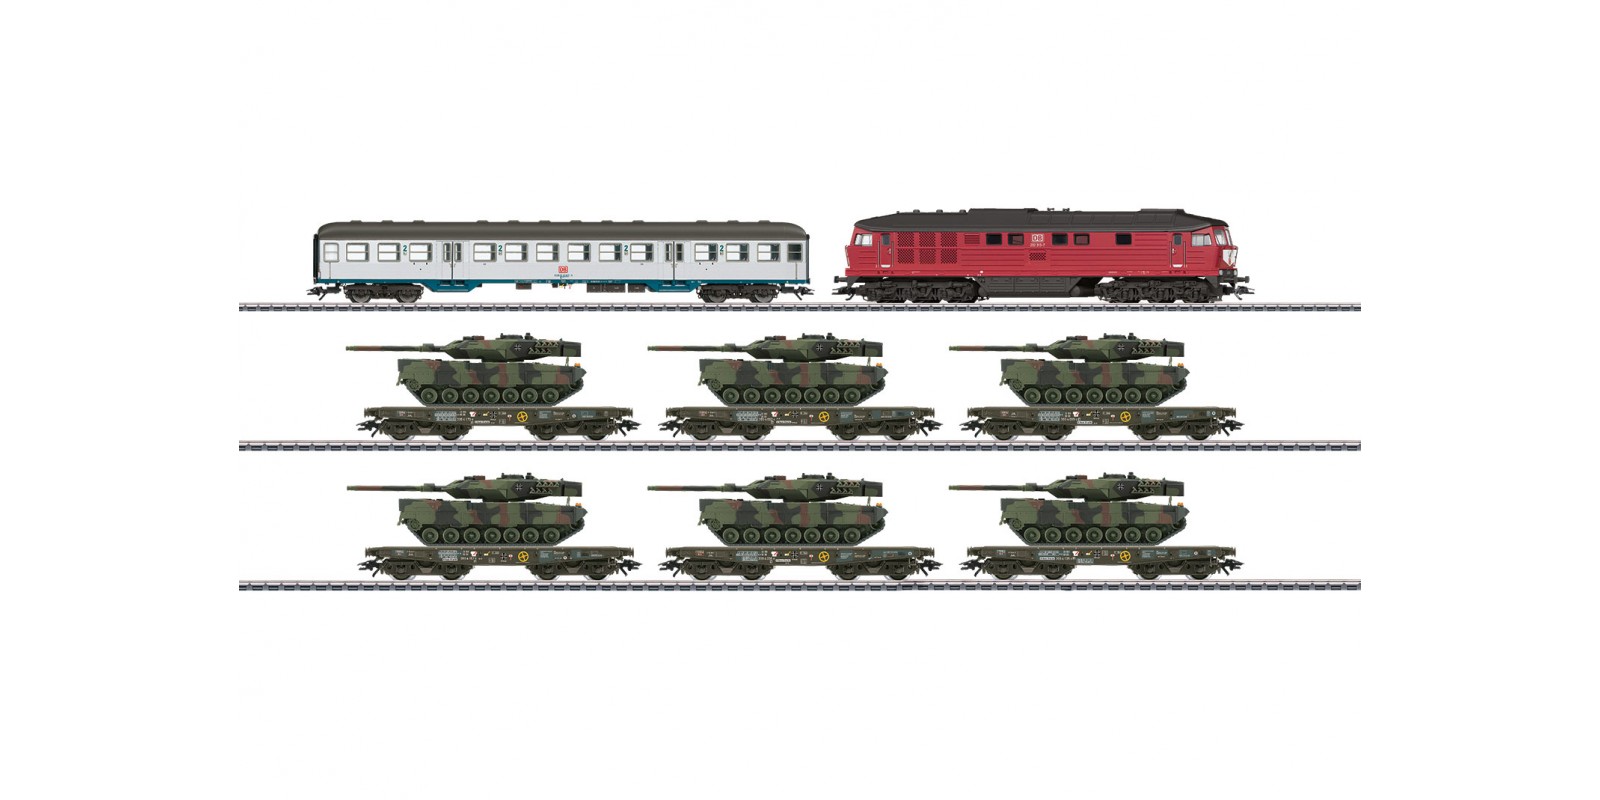 26606 Freight Train with Military Freight for the German Federal Army